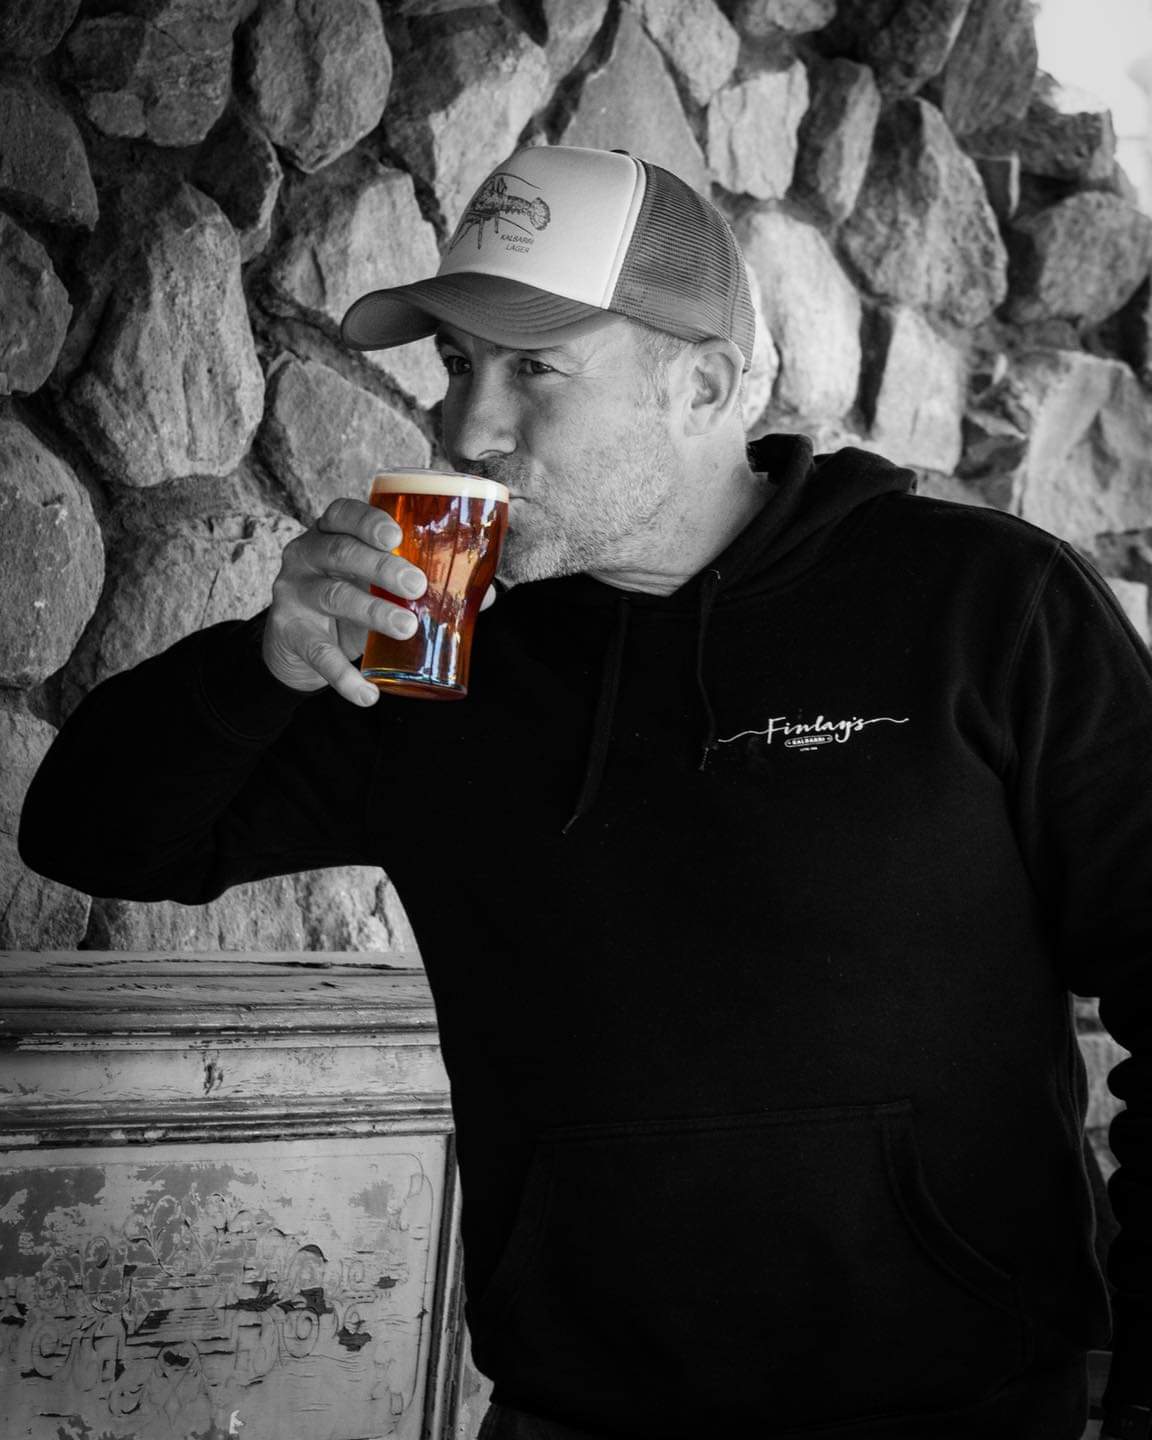 Warrick, Head Brewer at Finlay's Brewing Co samples beer from a glass